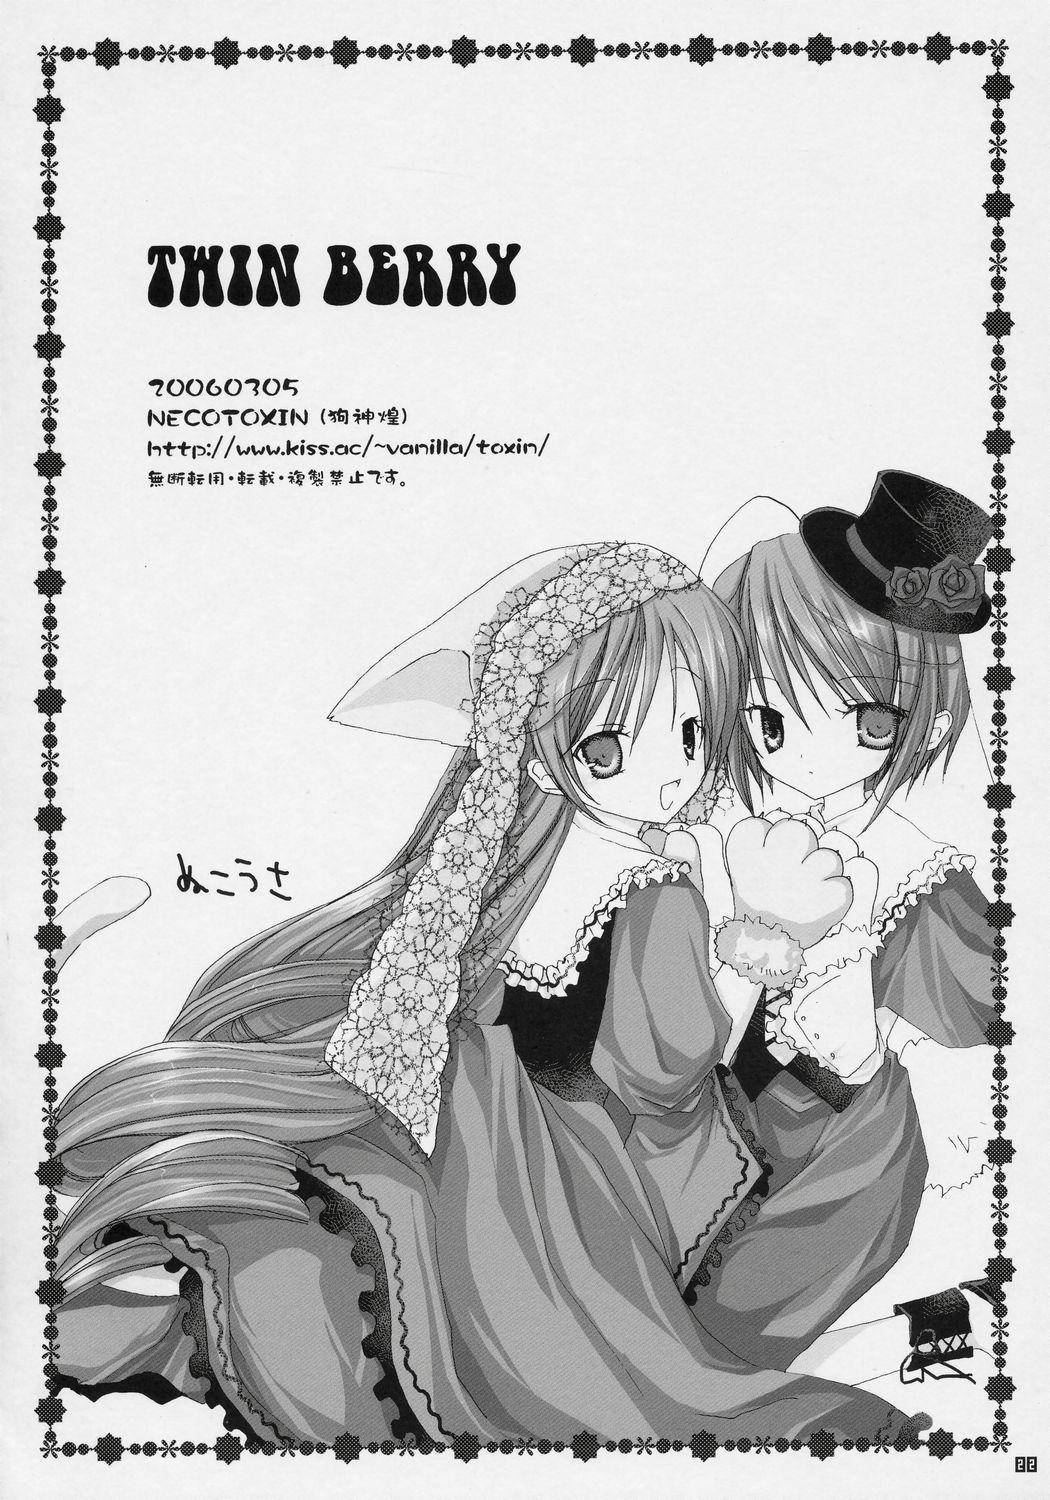 Sex Pussy TwinBerry - Rozen maiden Sexy Whores - Page 21